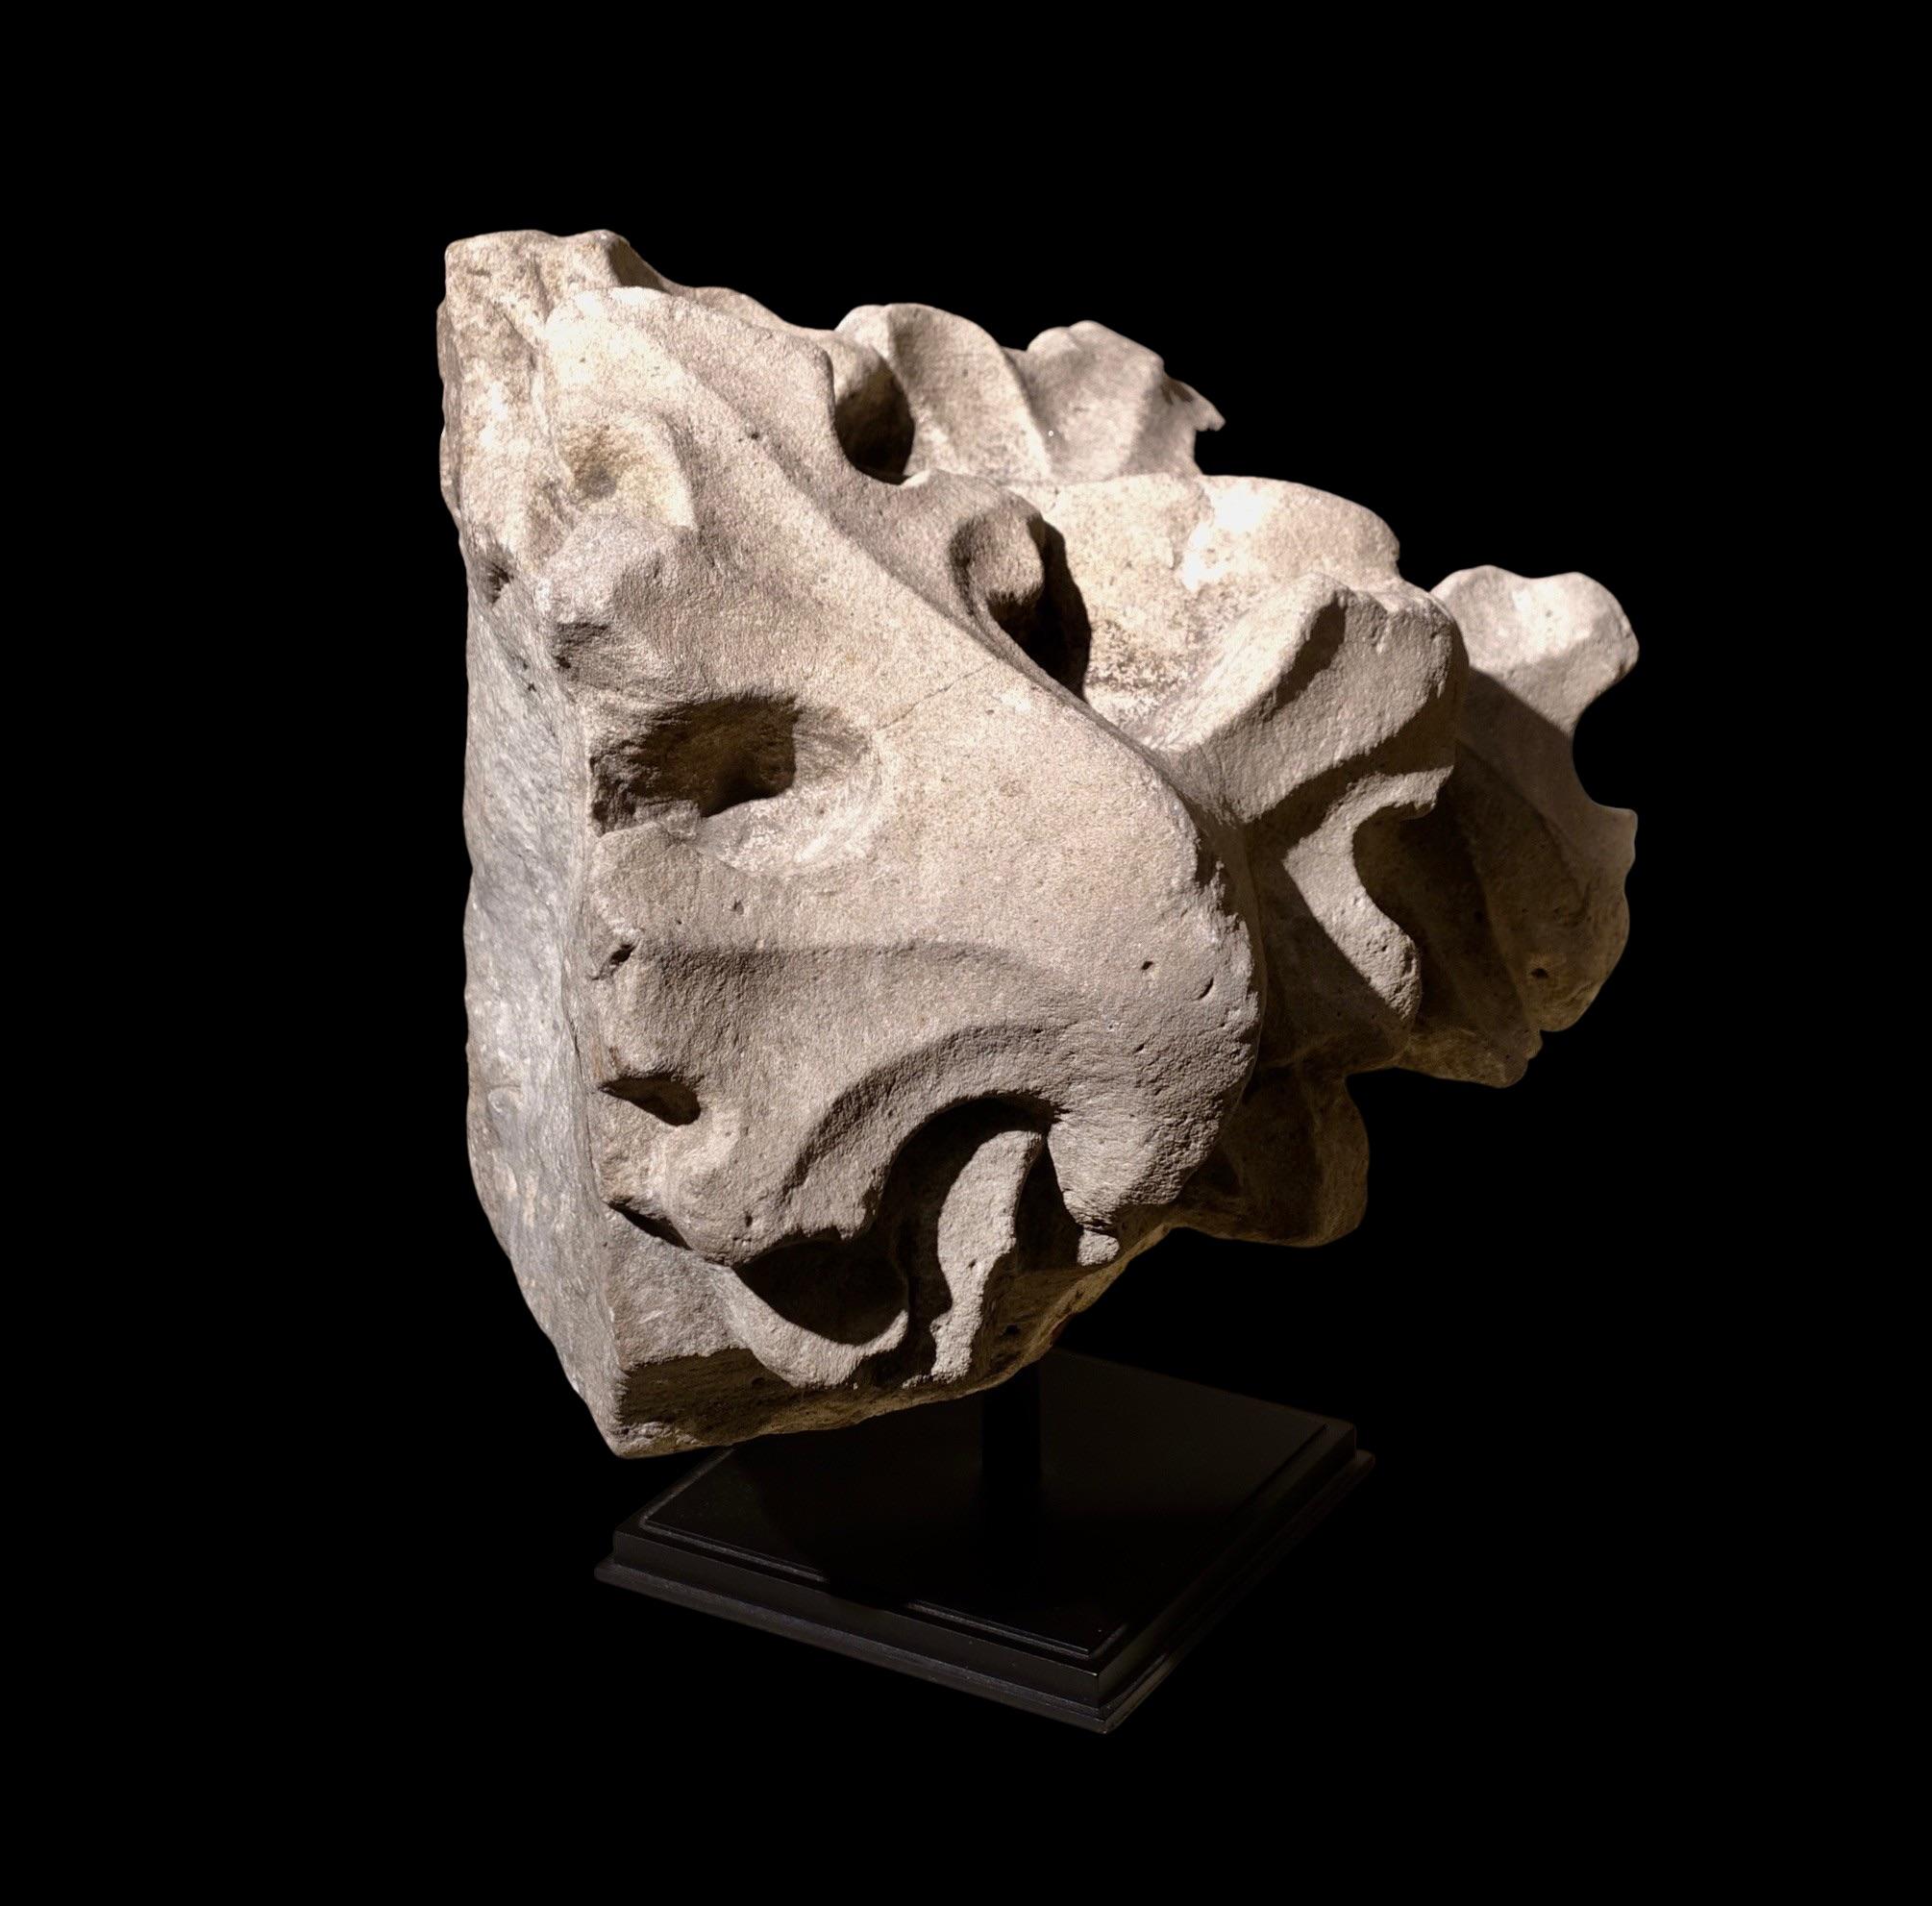 Gothic architectural fragment representing vine leaves 
France, 15th century
Sandstone
H 21 x 21 x 17 cm
mounted on a modern metal pedestal

Remarkable state of preservation

One similar fragment is displayed in the Musée de Cluny collection